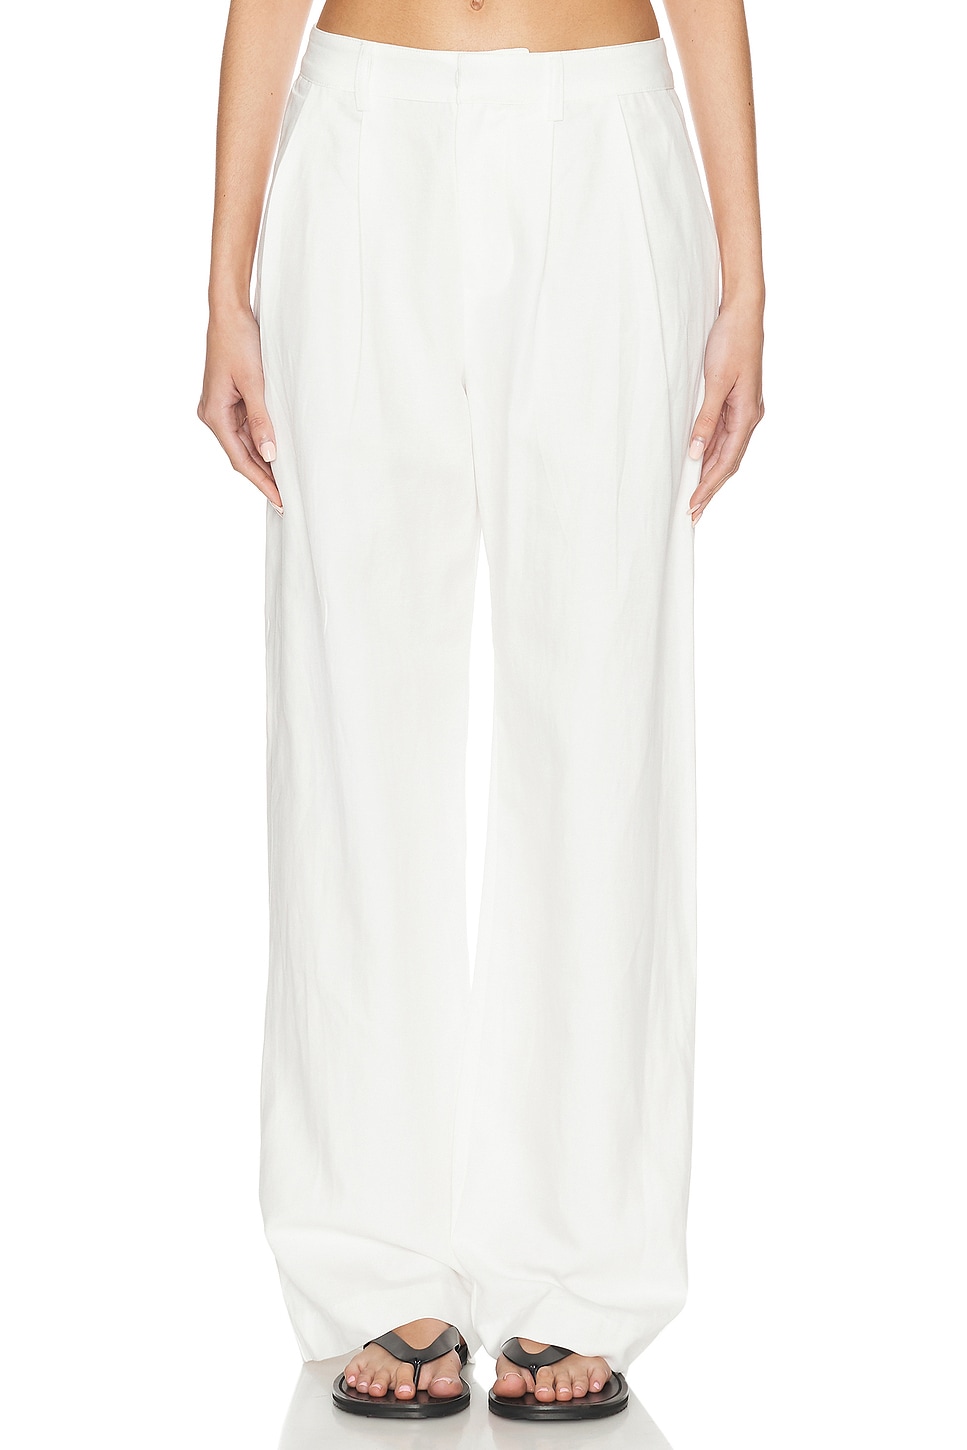 Image 1 of Enza Costa Twill Sartorial Pant in Off White